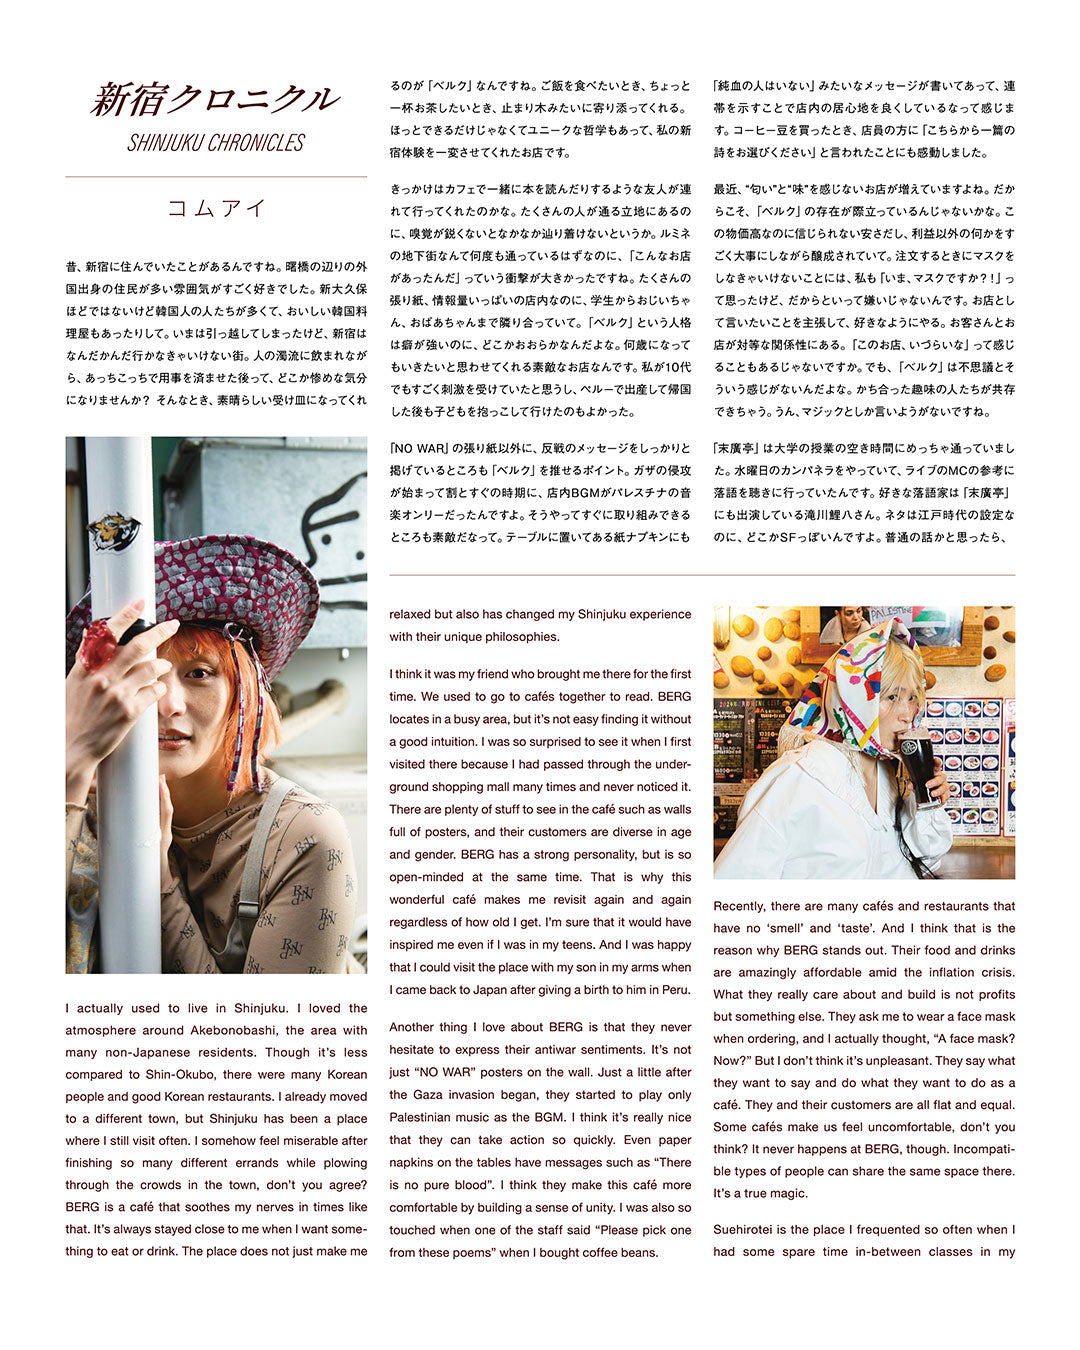 Nepenthes In Print #20 - Shinjuku Special Feature